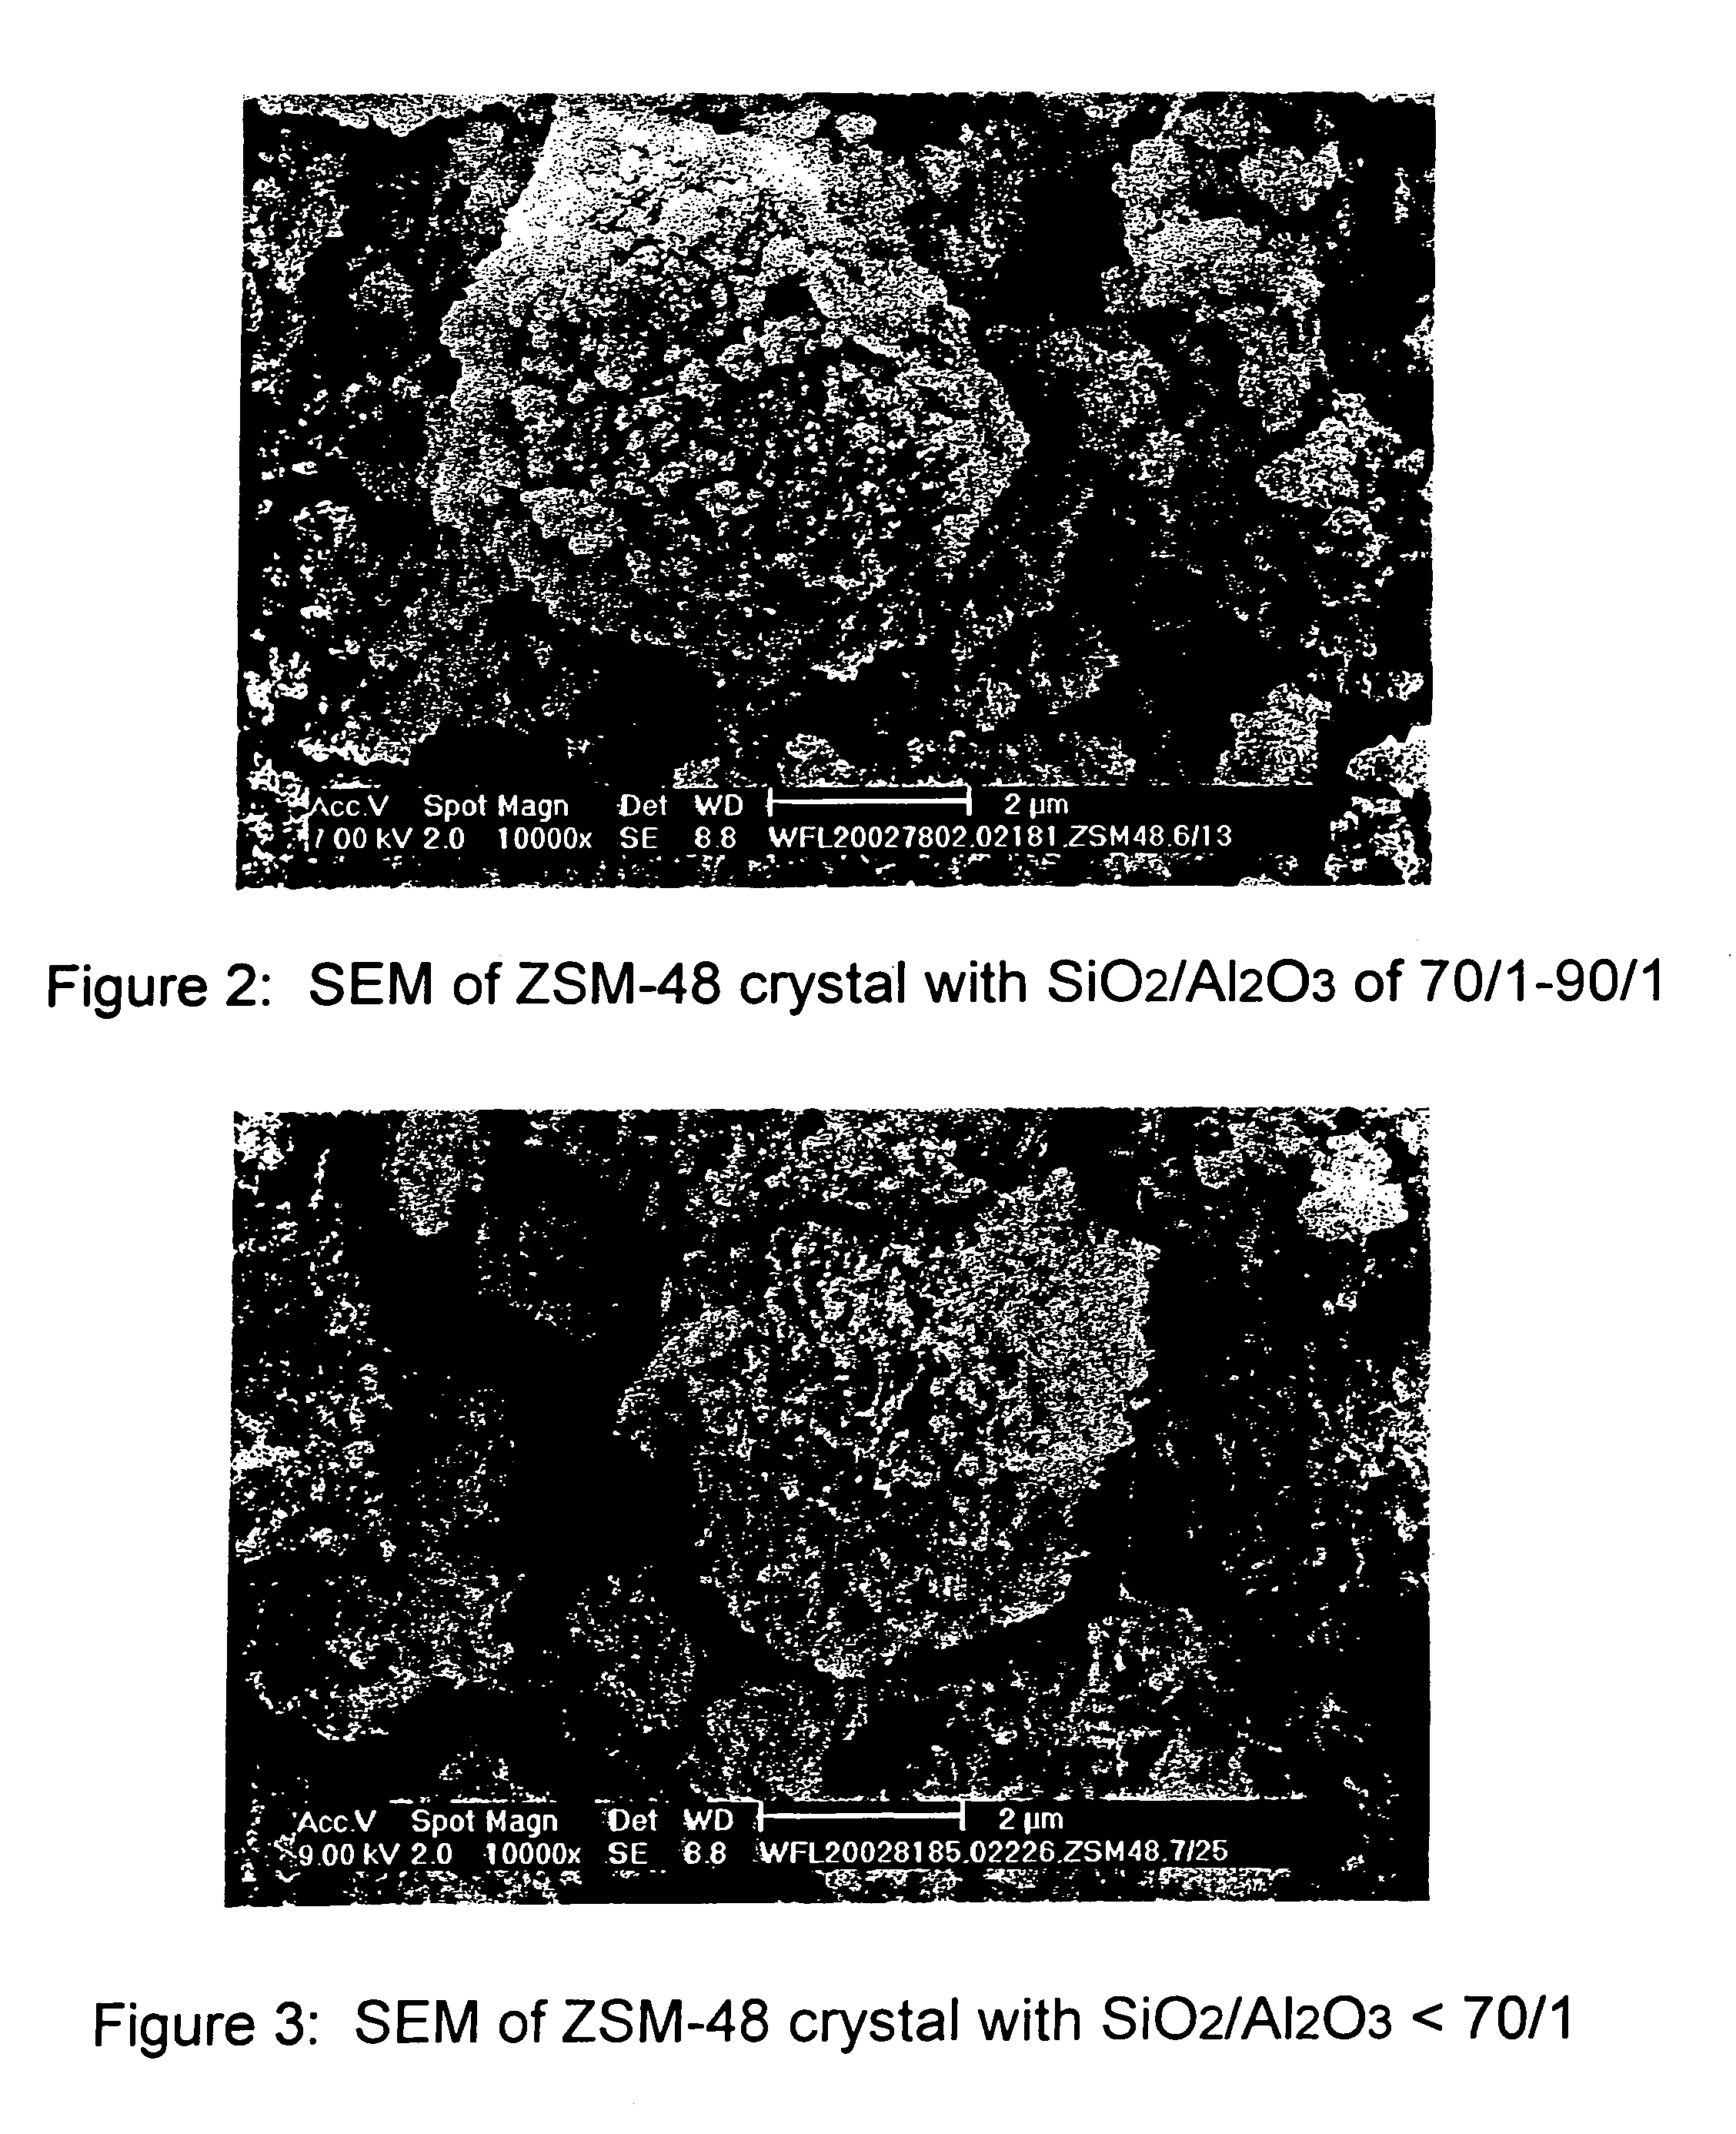 Synthesis of ZSM-48 crystals with heterostructural, non ZSM-48, seeding